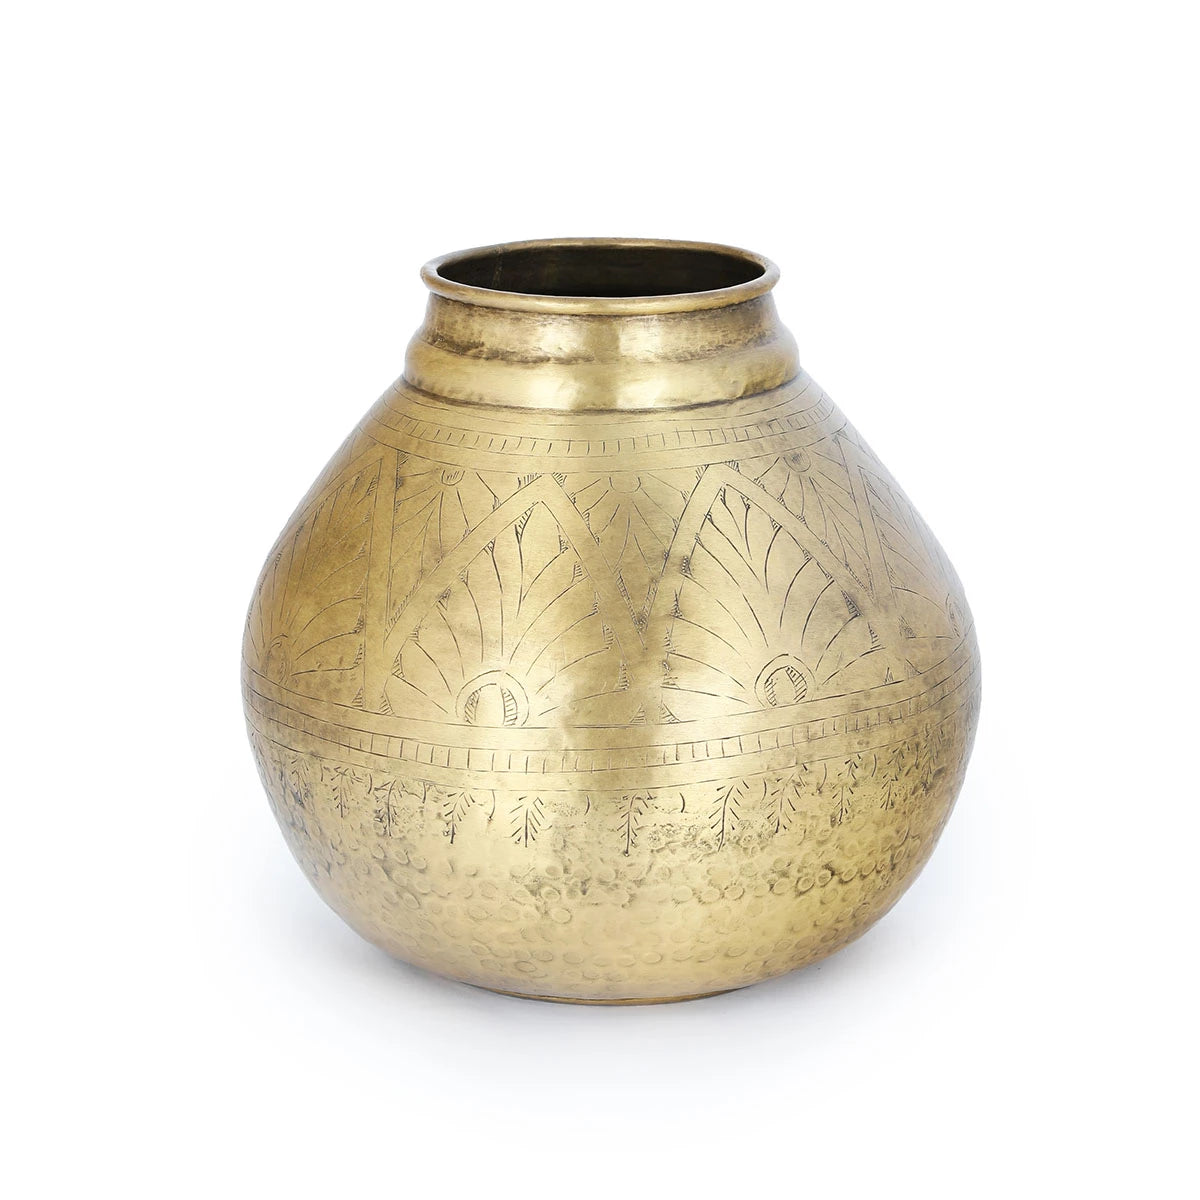 Beautiful Handcrafted Design Flower Pot Brass Home Decor, Small Size Vase,  Indian Brass Made Table Décor Vase for Artificial Flowers G7-1044 -   Sweden